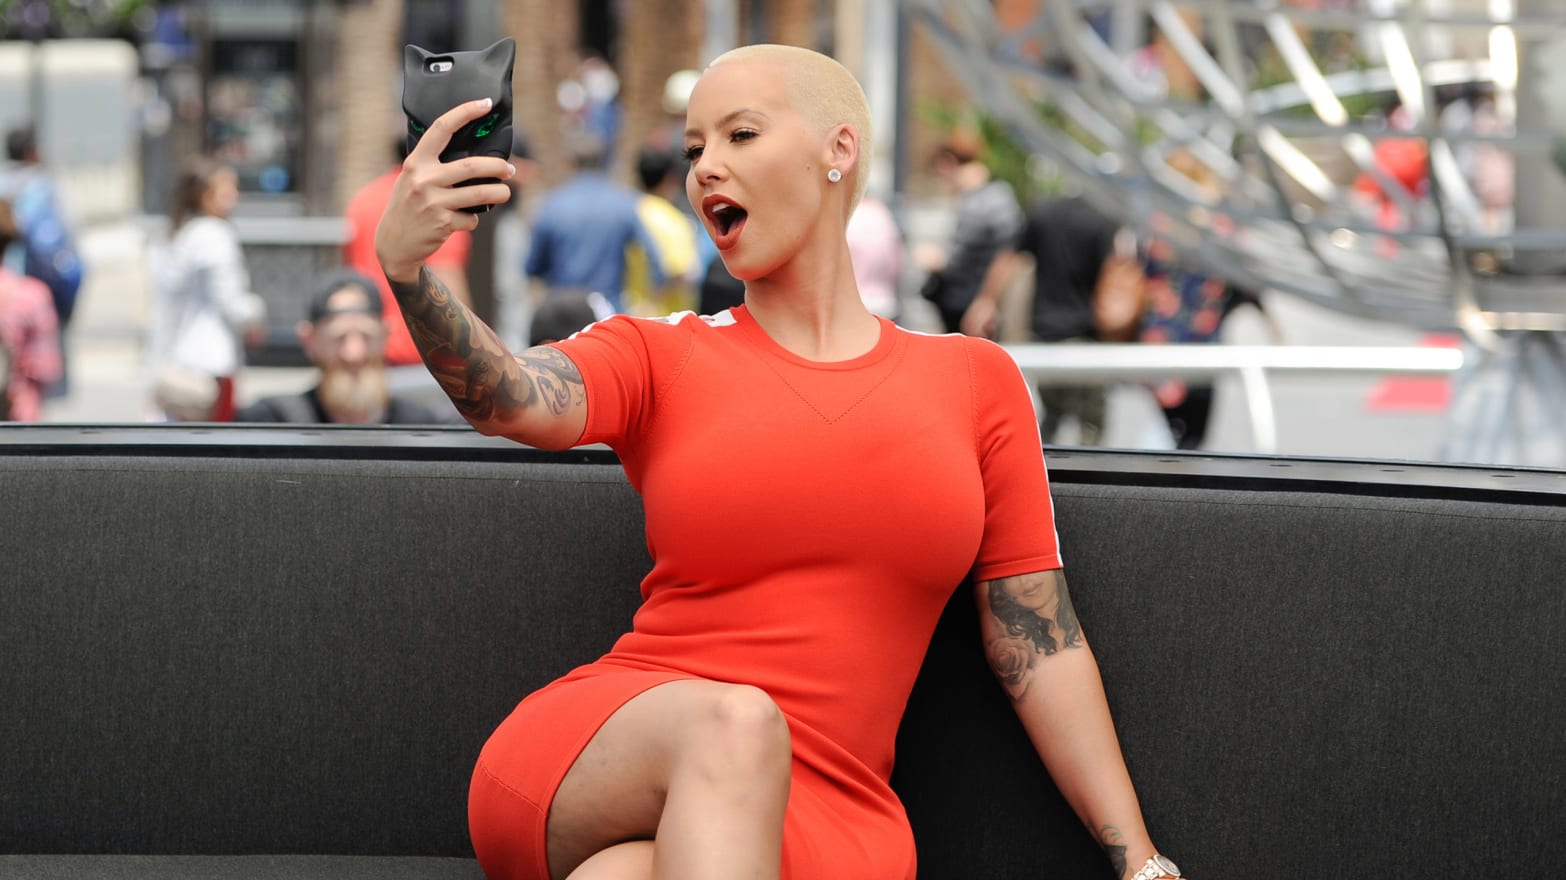 Amber Rose on the Ian Connor Rape Allegations 21 Women Have Reached Out to Me So Far image